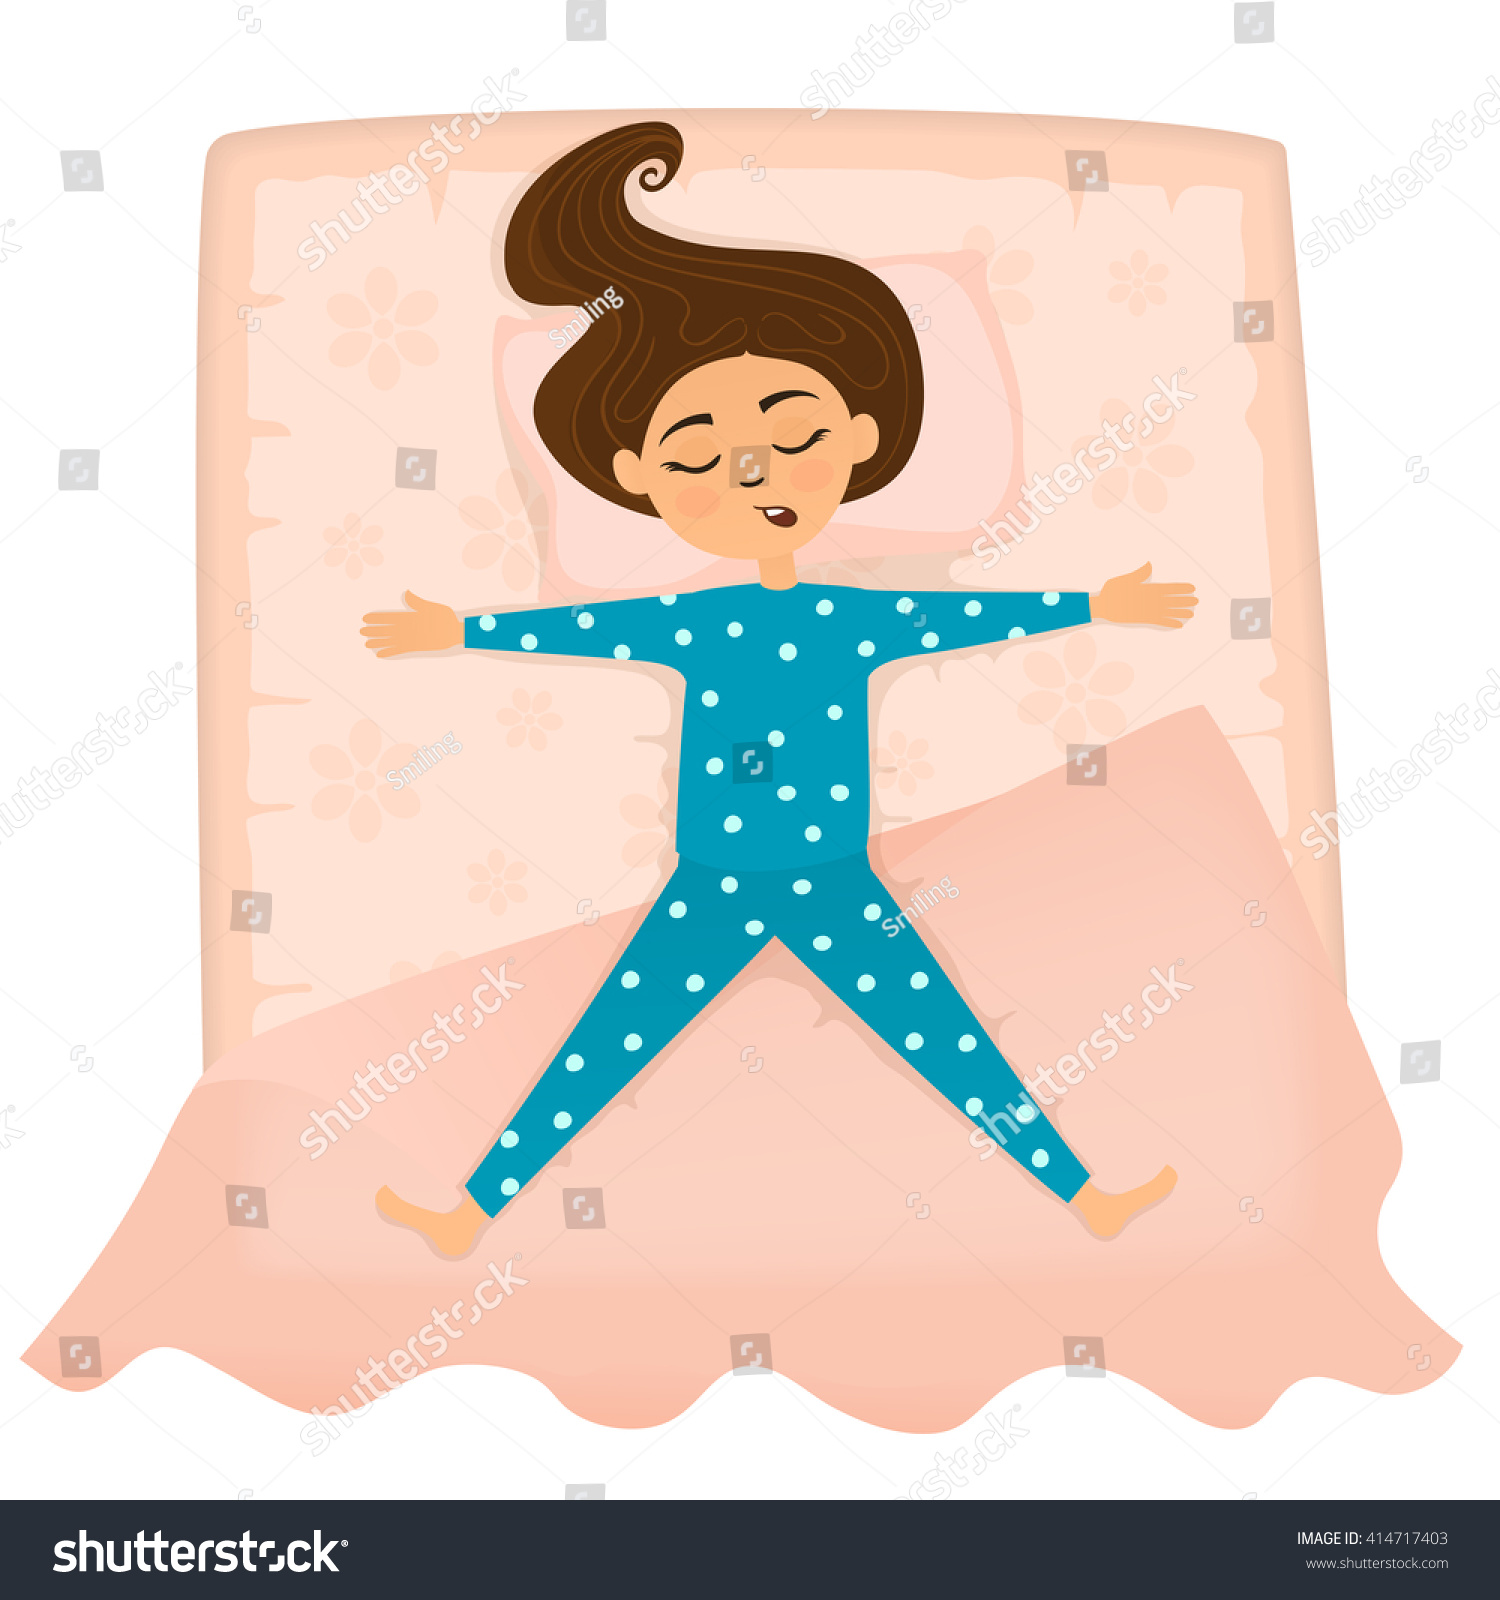 clipart girl in bed - photo #38